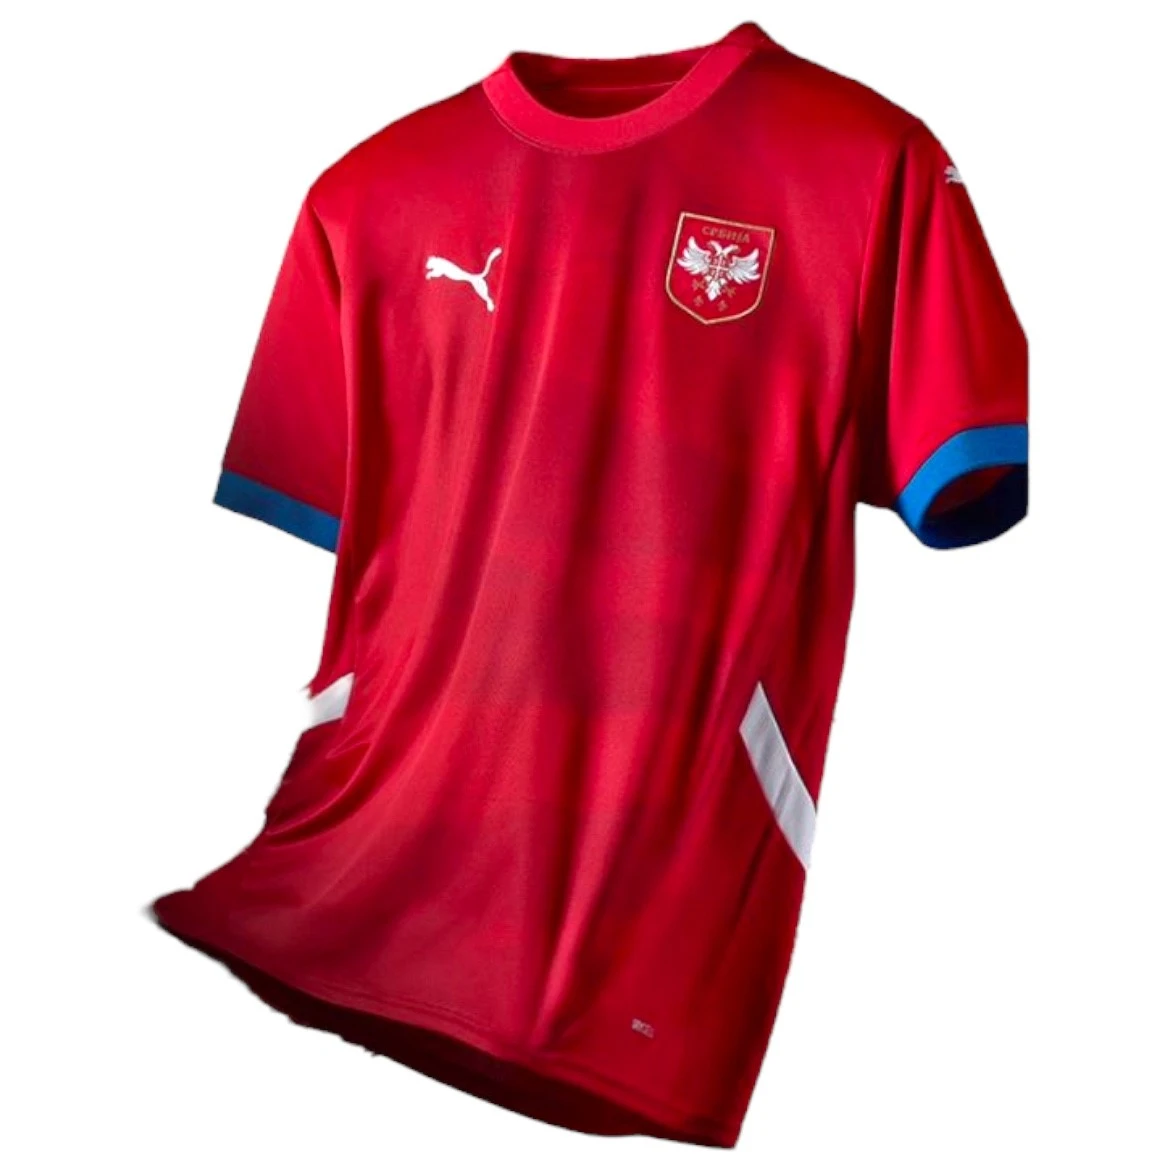 CHILDREN'S JERSEY OF THE FOOTBALL REPRESENTATION OF SERBIA, EURO 2024 - PUMA, RED, WITH PRINT-2